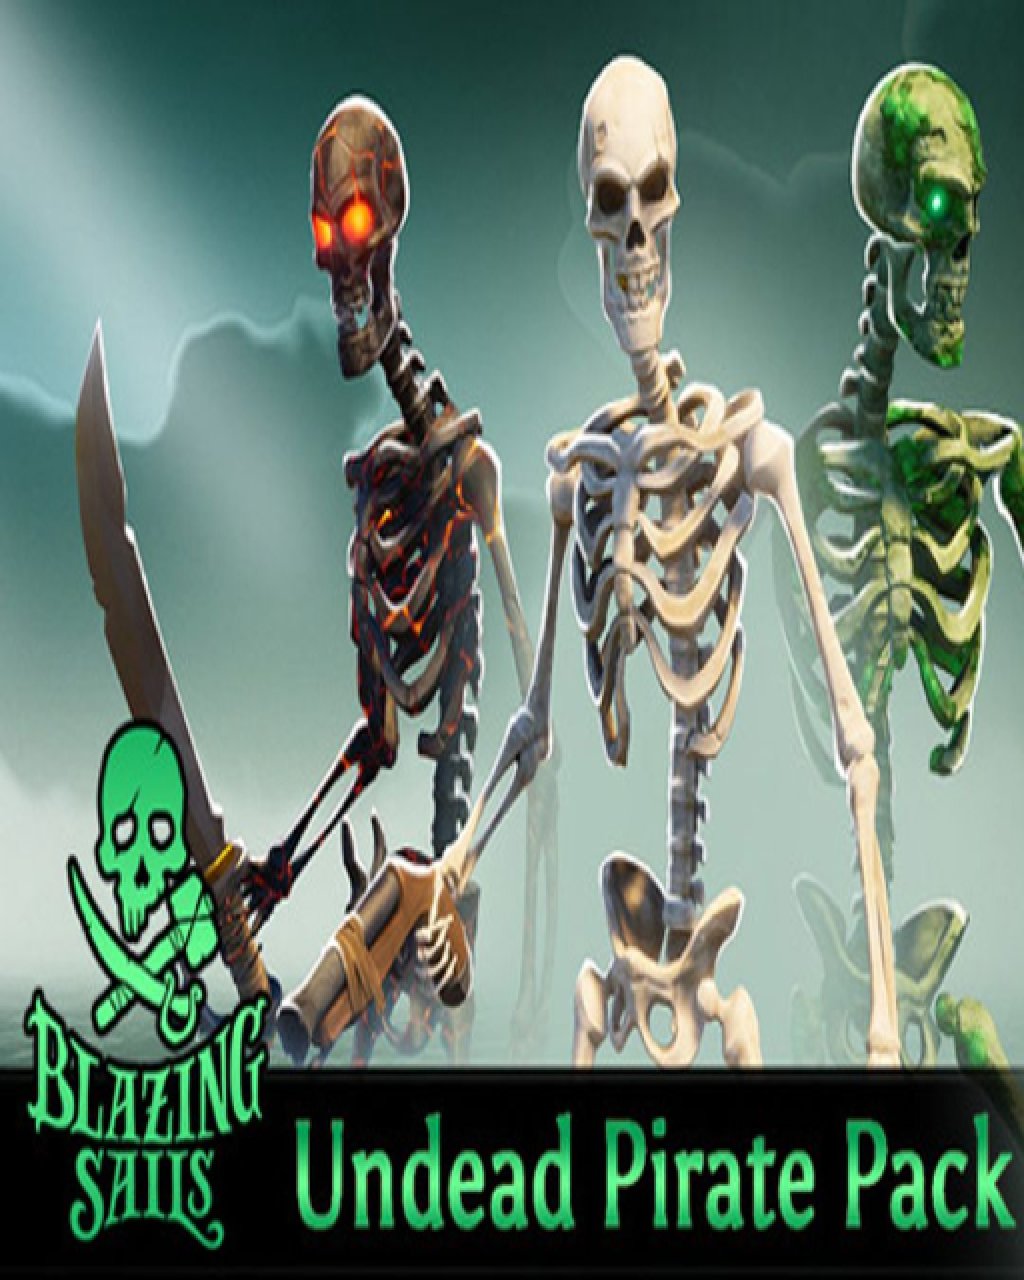 Blazing Sails Undead Pirate Pack